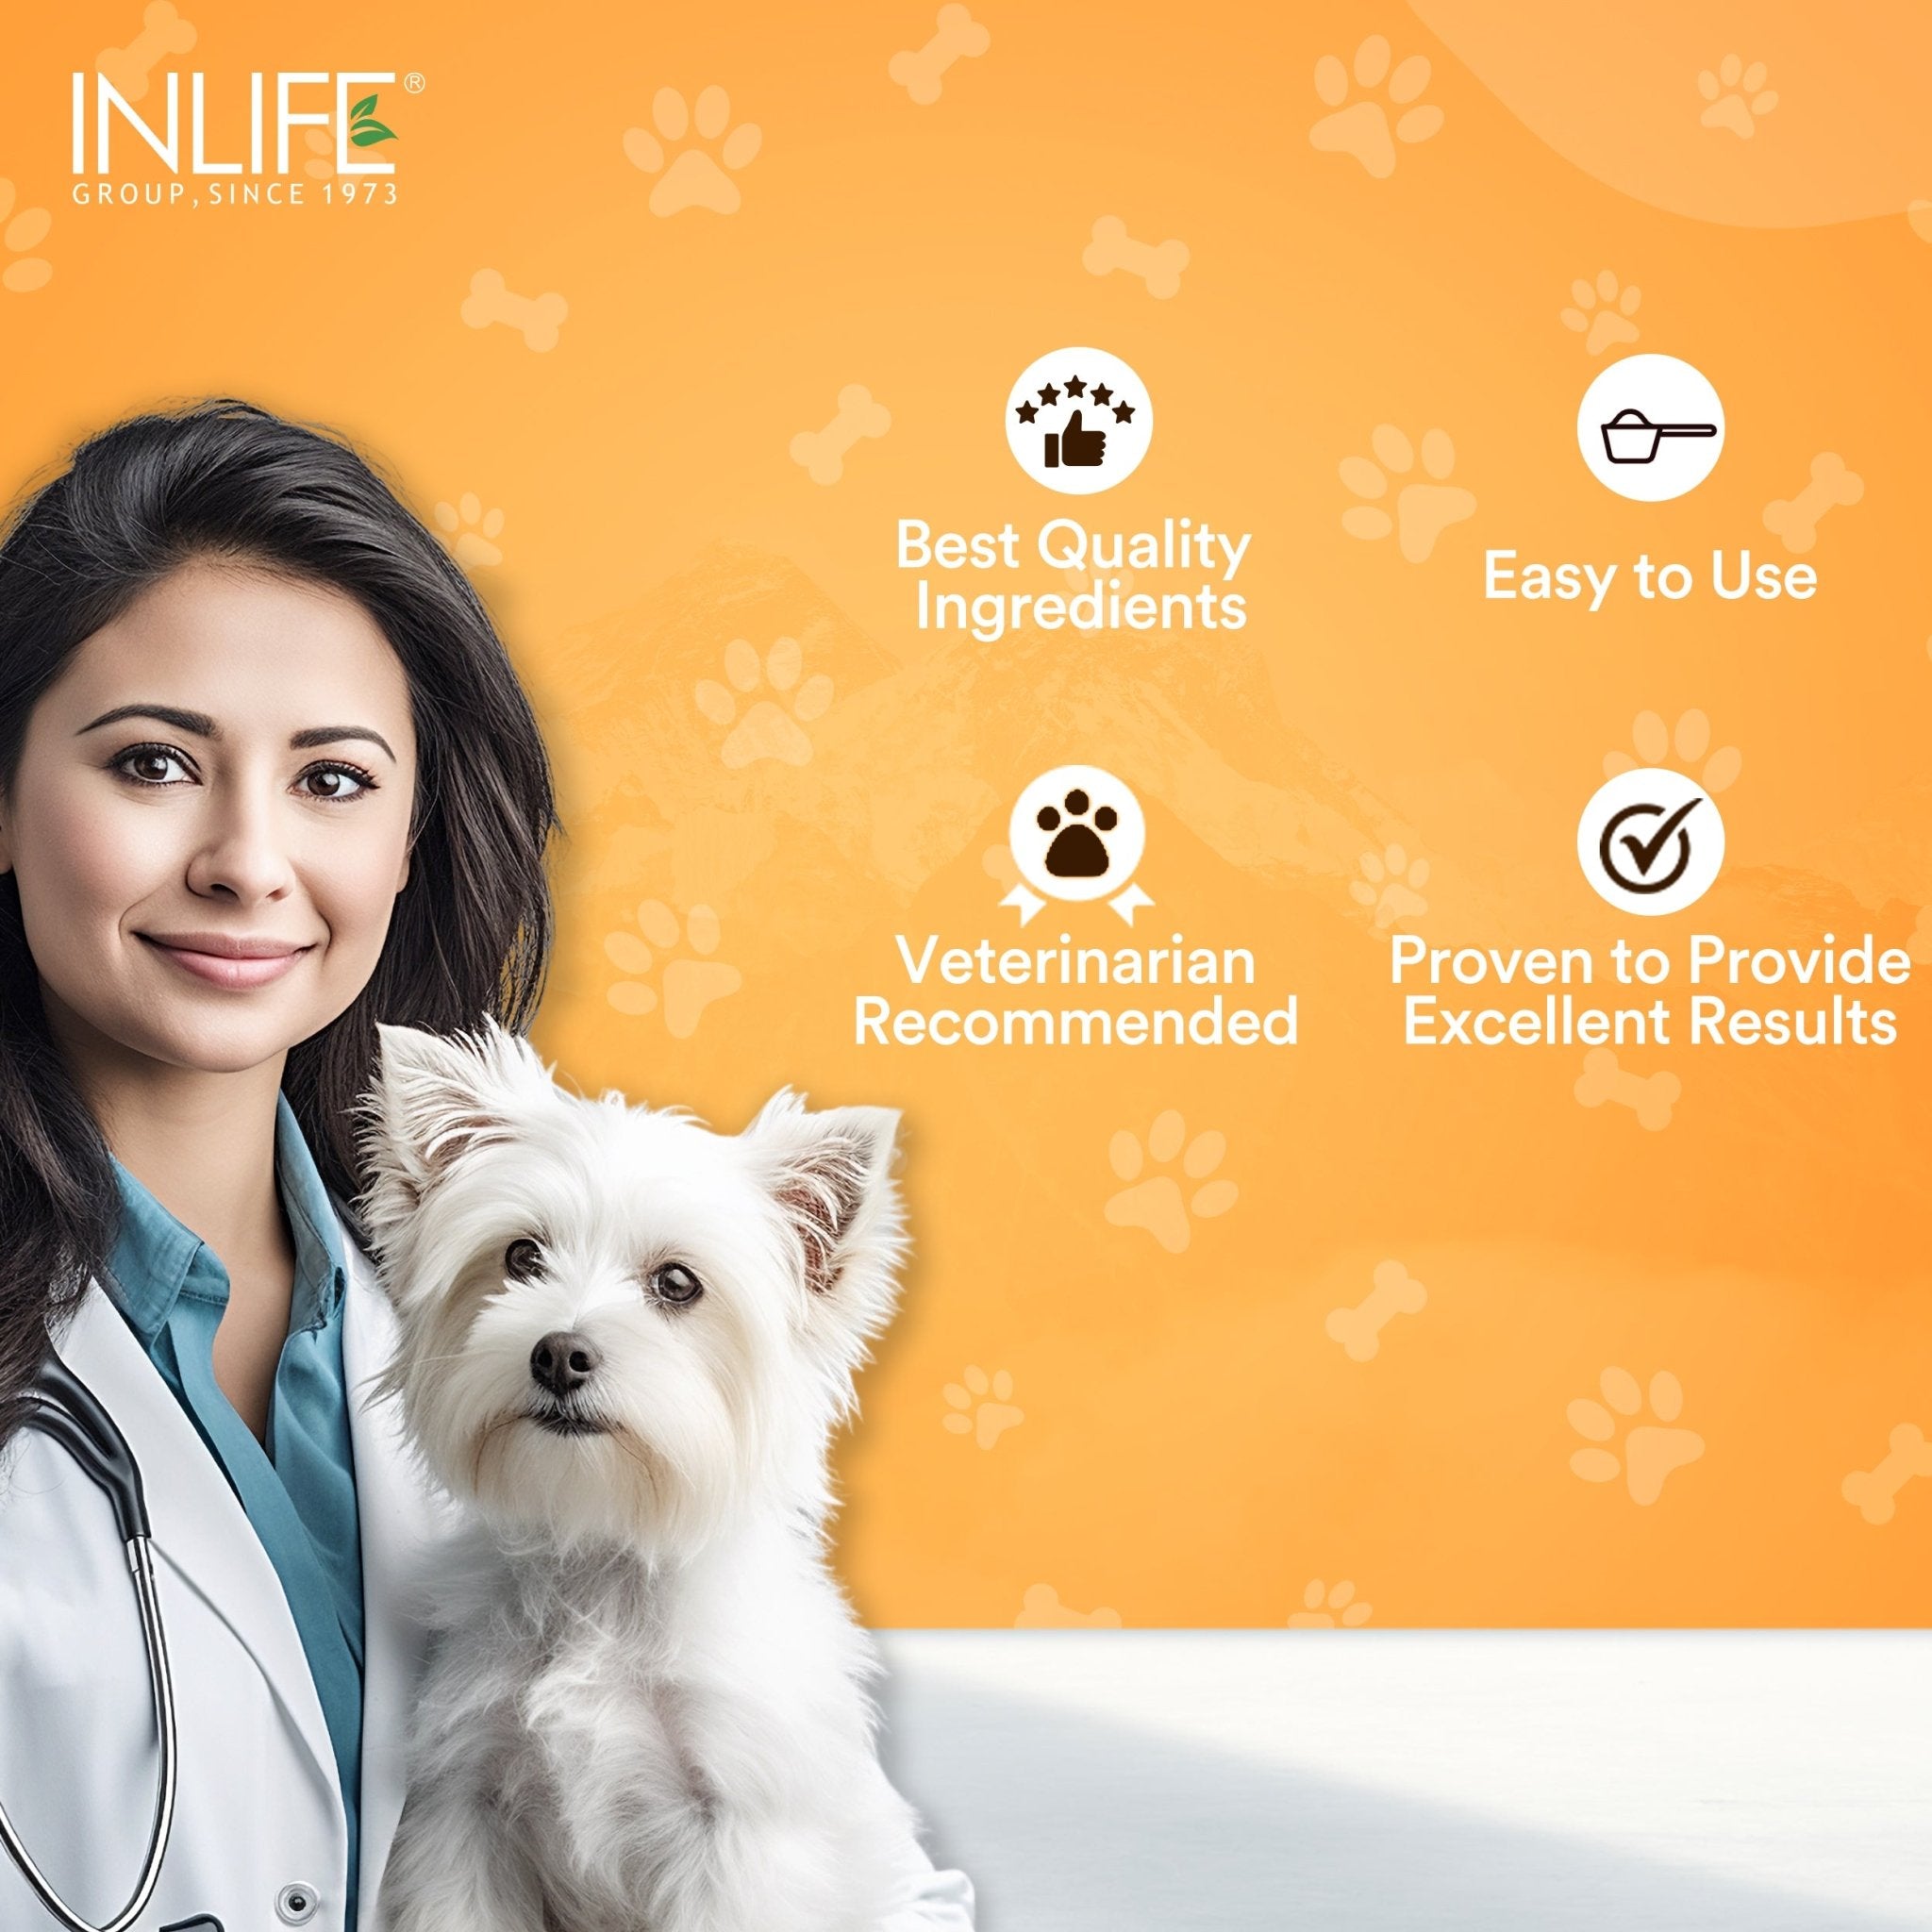 INLIFE Nutritional Meal Mix Powder for Dogs Cats Pets, Advanced Multi-Nutrient Formula - Inlife Pharma Private Limited